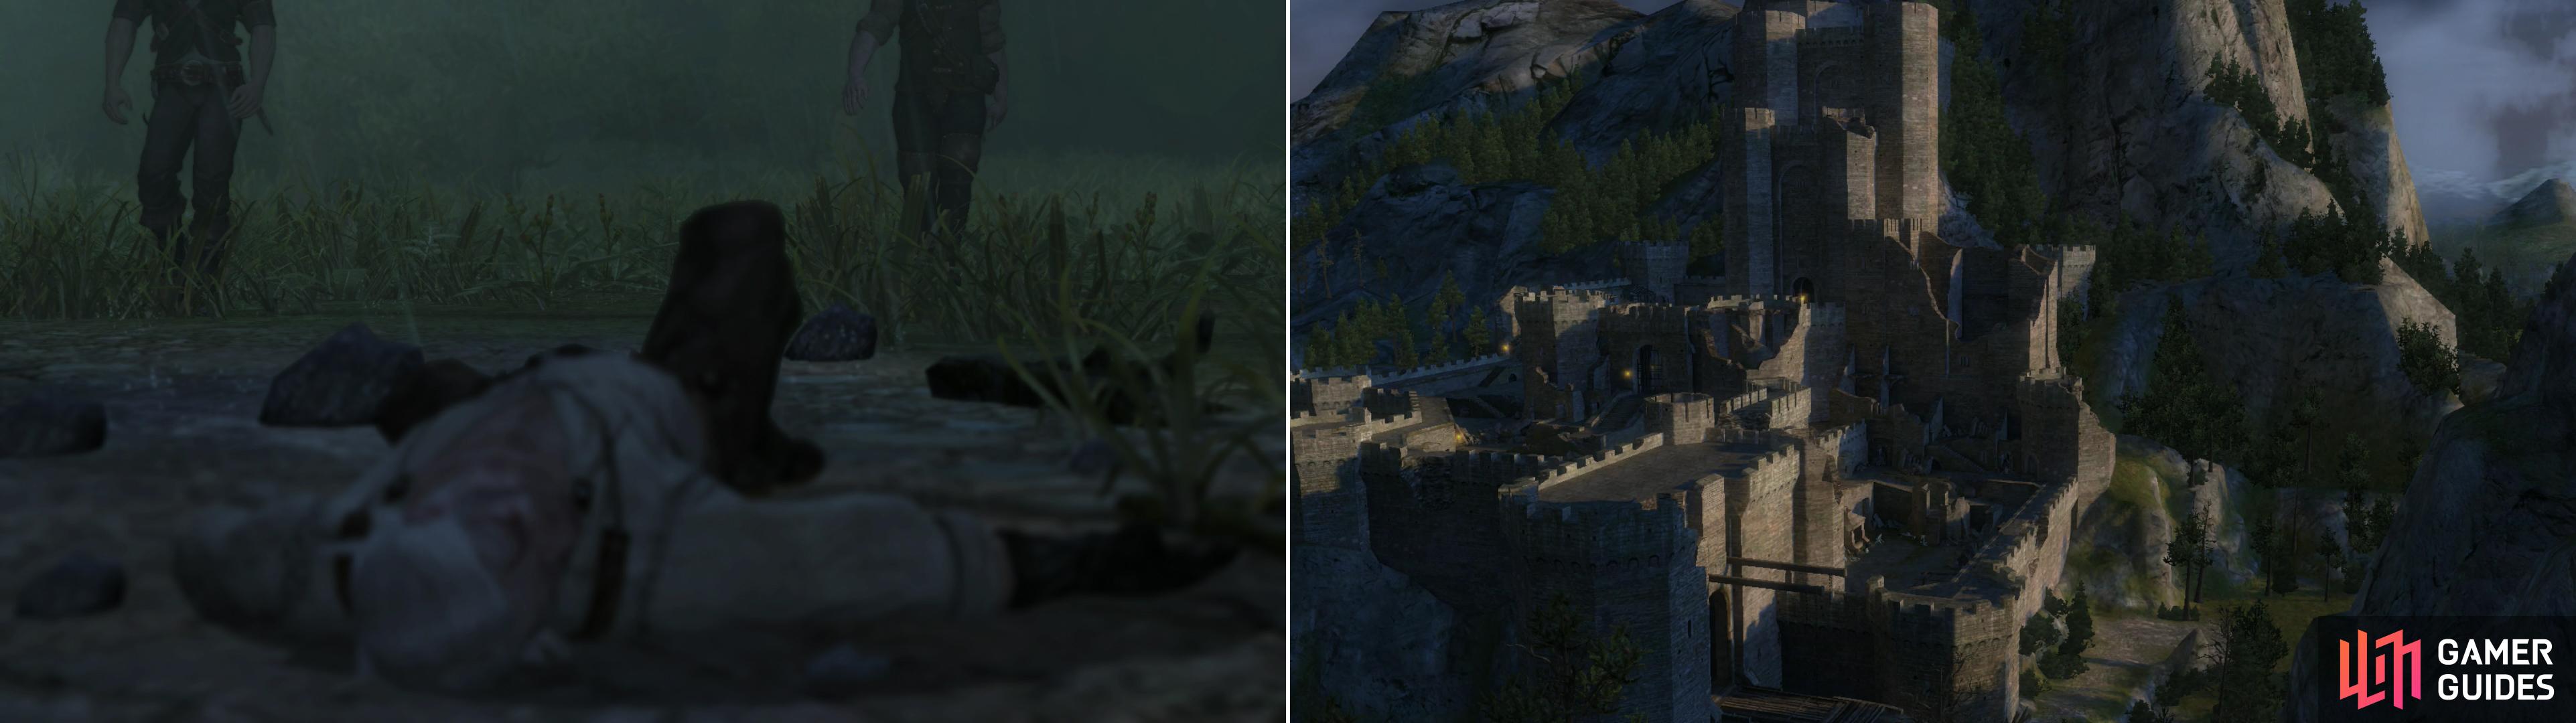 Pursued by the Wild Hunt, an exhaused Geralt collapses (left) and is brought to the fortress of Kaer Morhen to recover (right).